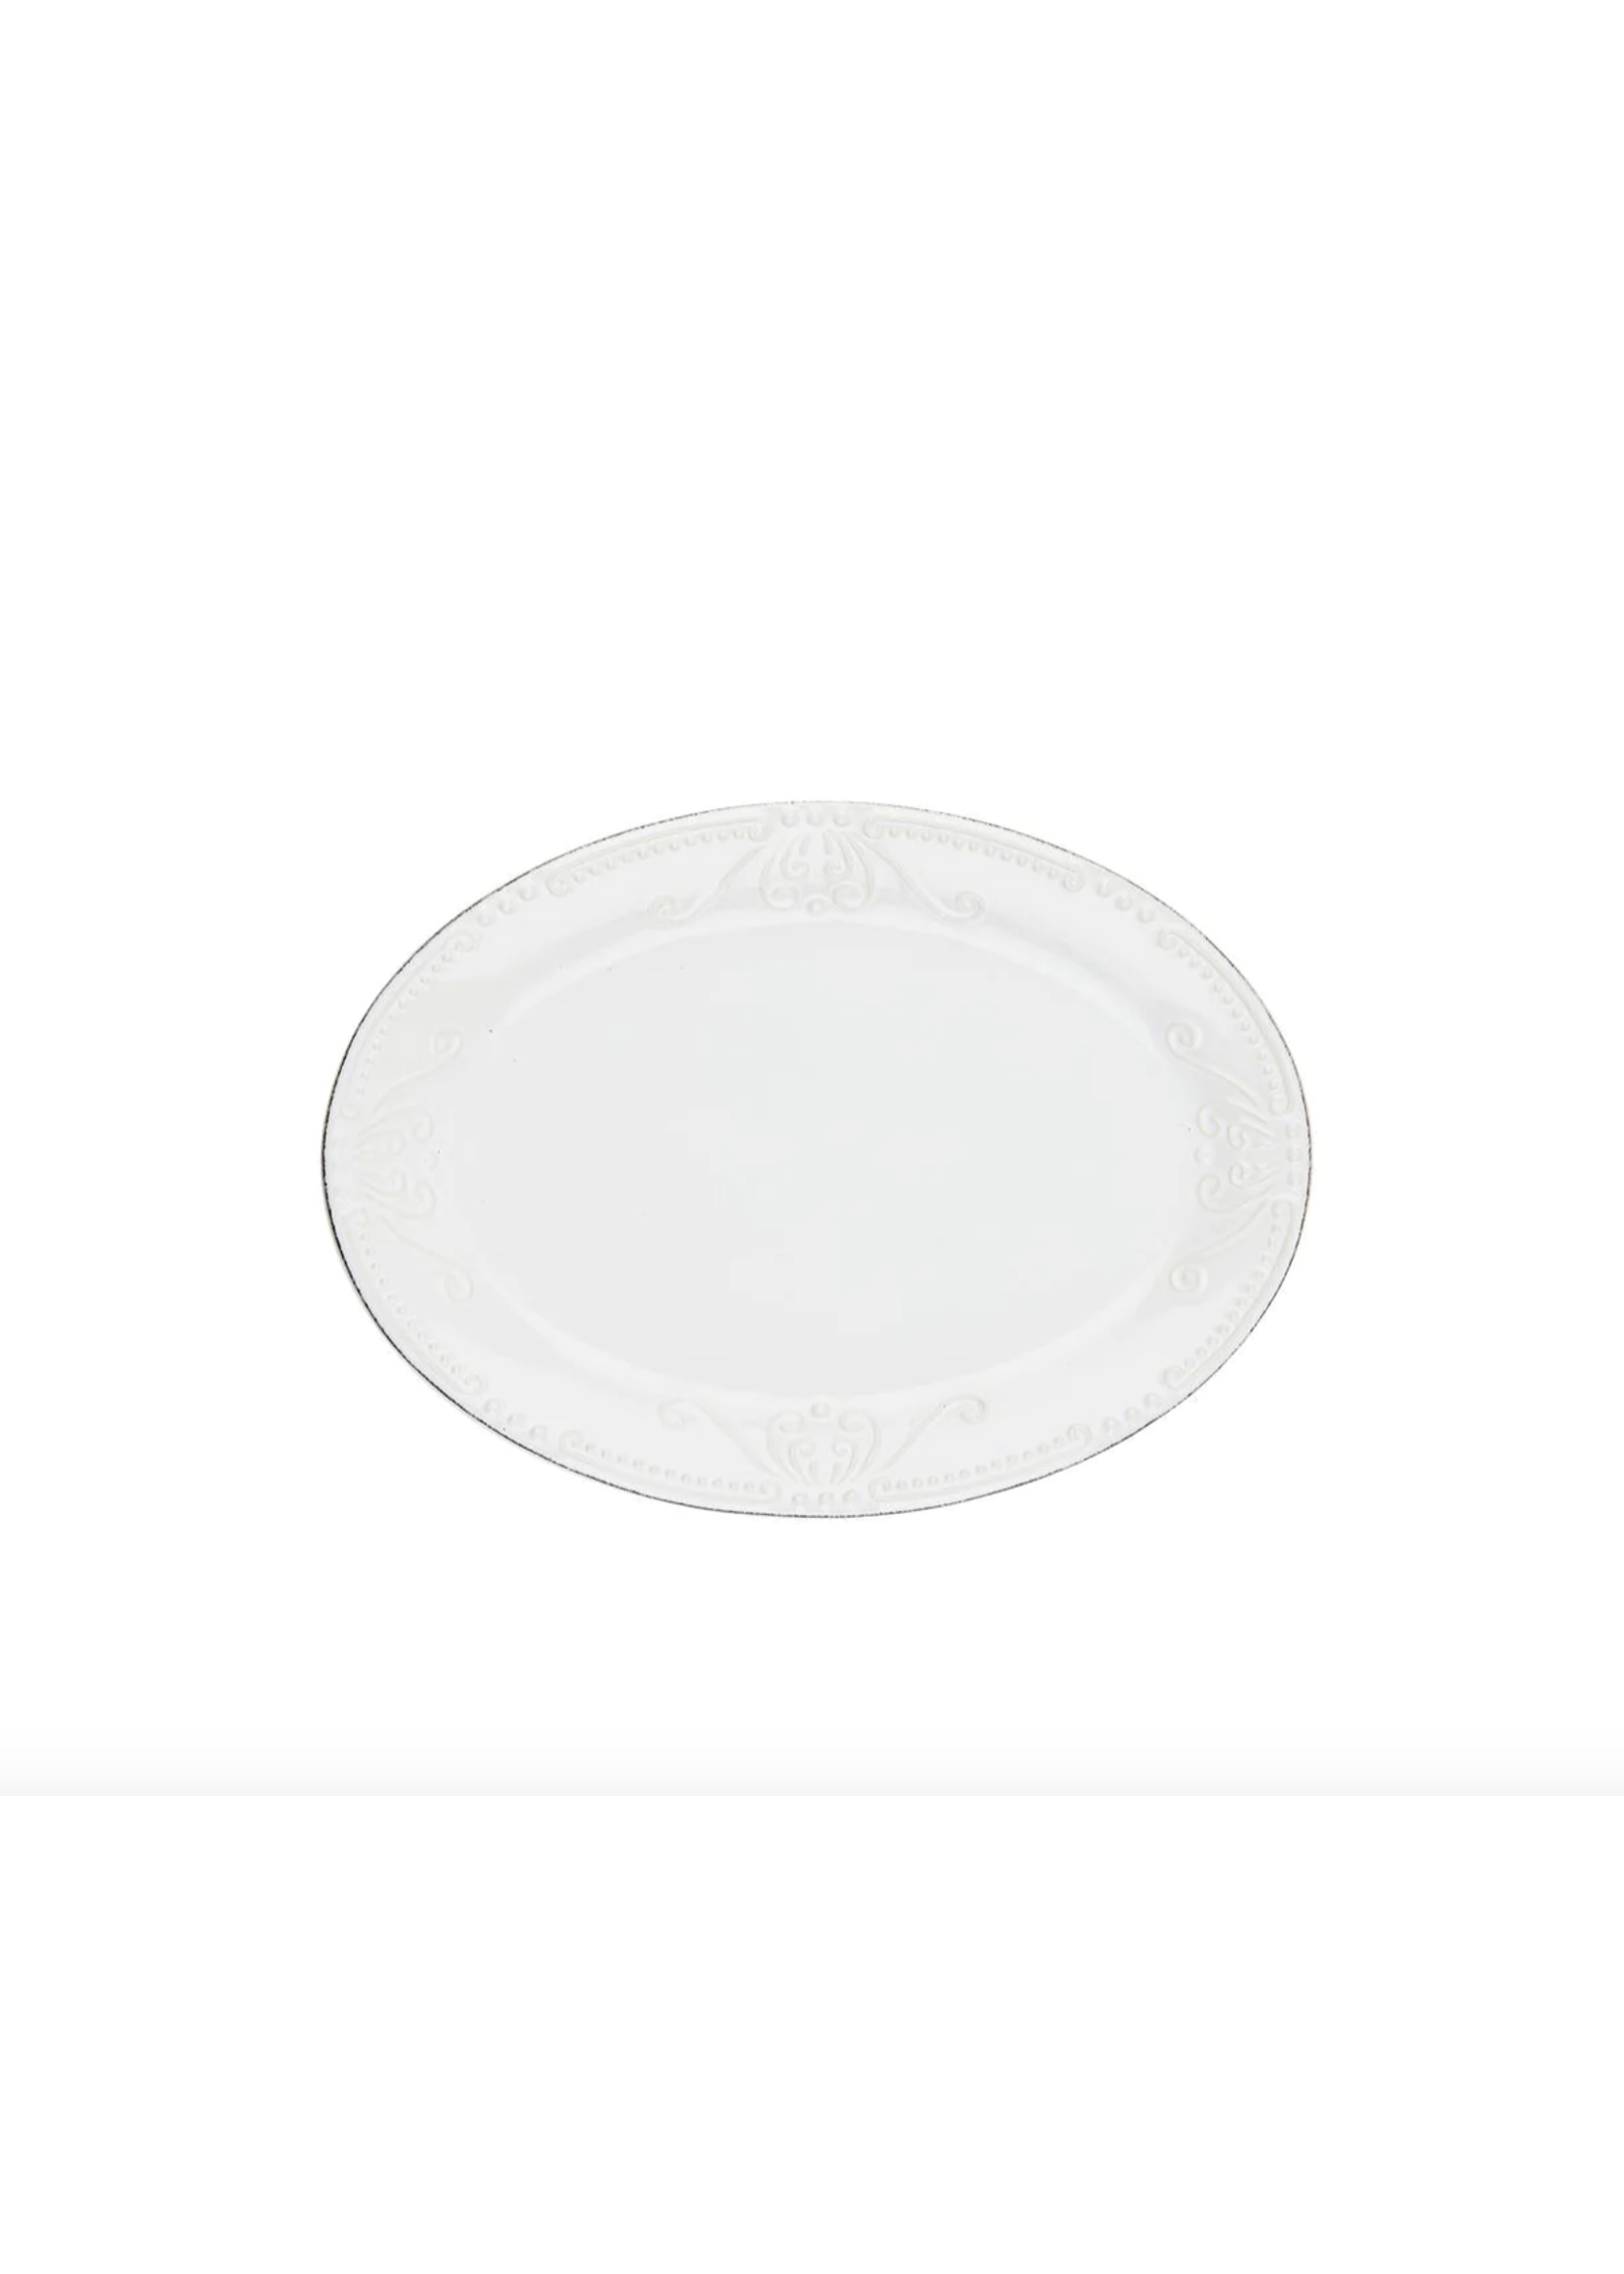 Skyros Designs Isabella Pure White Small Oval Platter